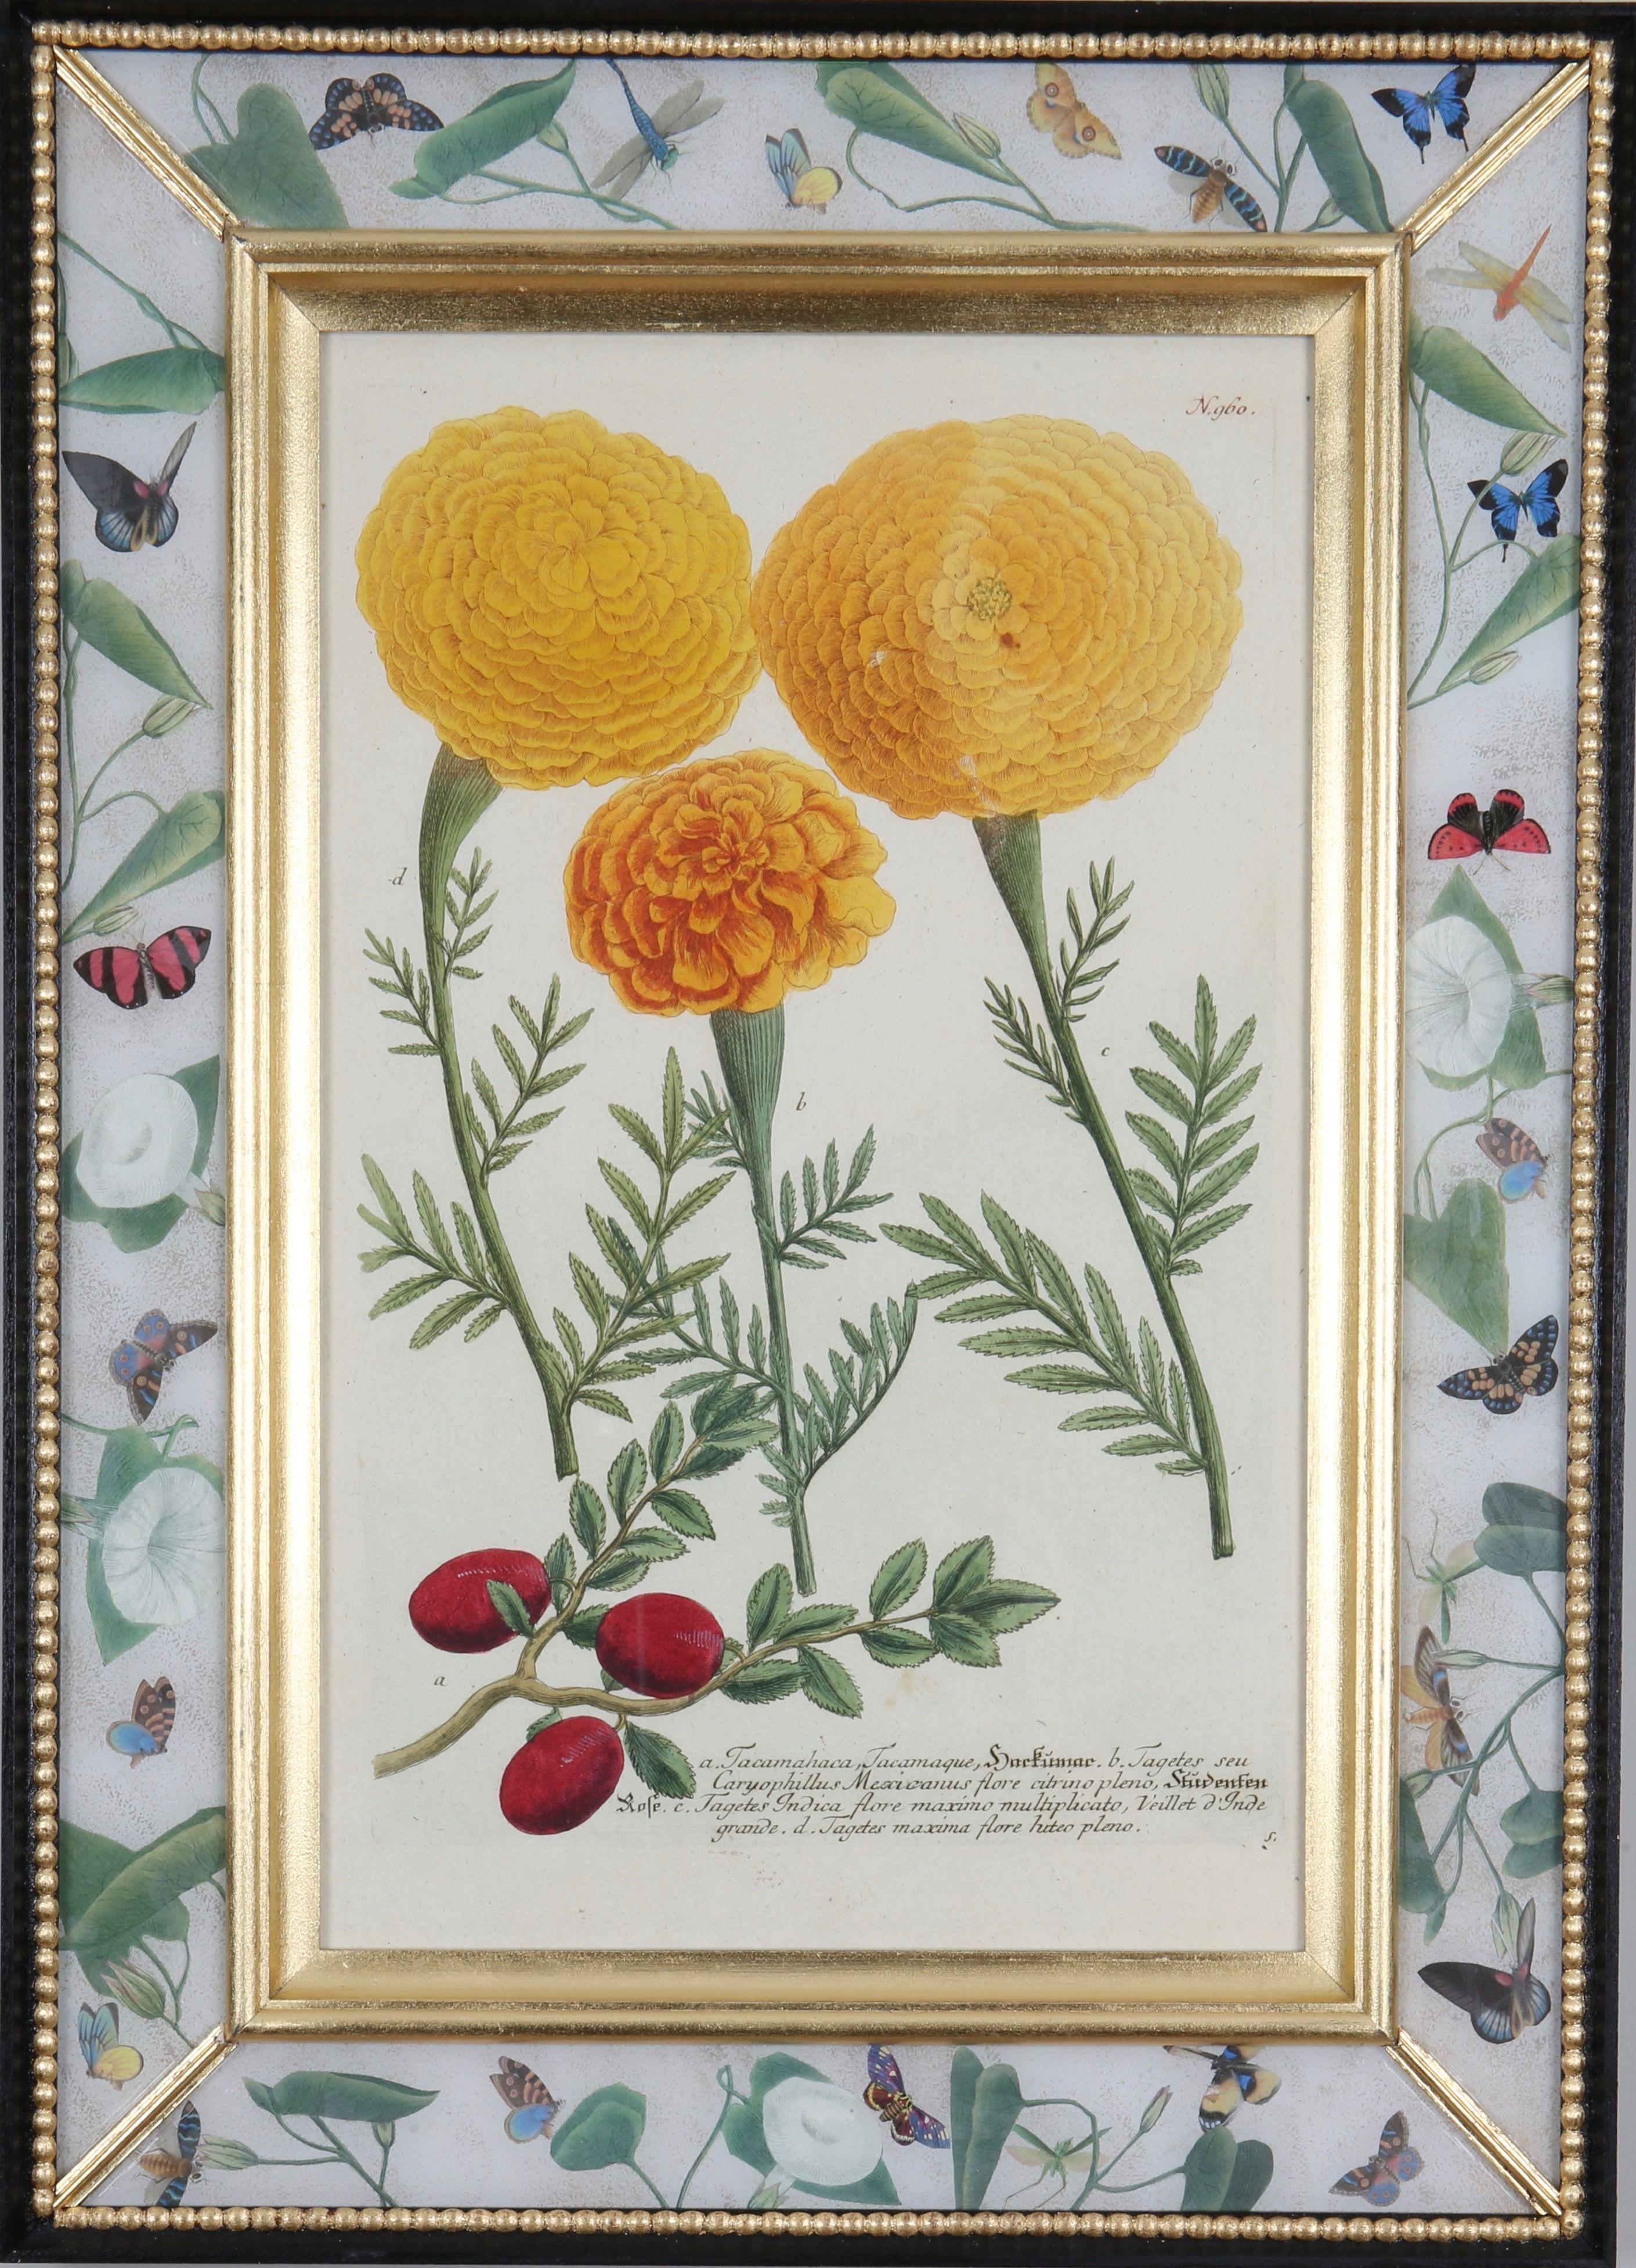 Johann Weinmann: c18th Botanical Engravings in Decalcomania Frames, Set of 6 For Sale 5